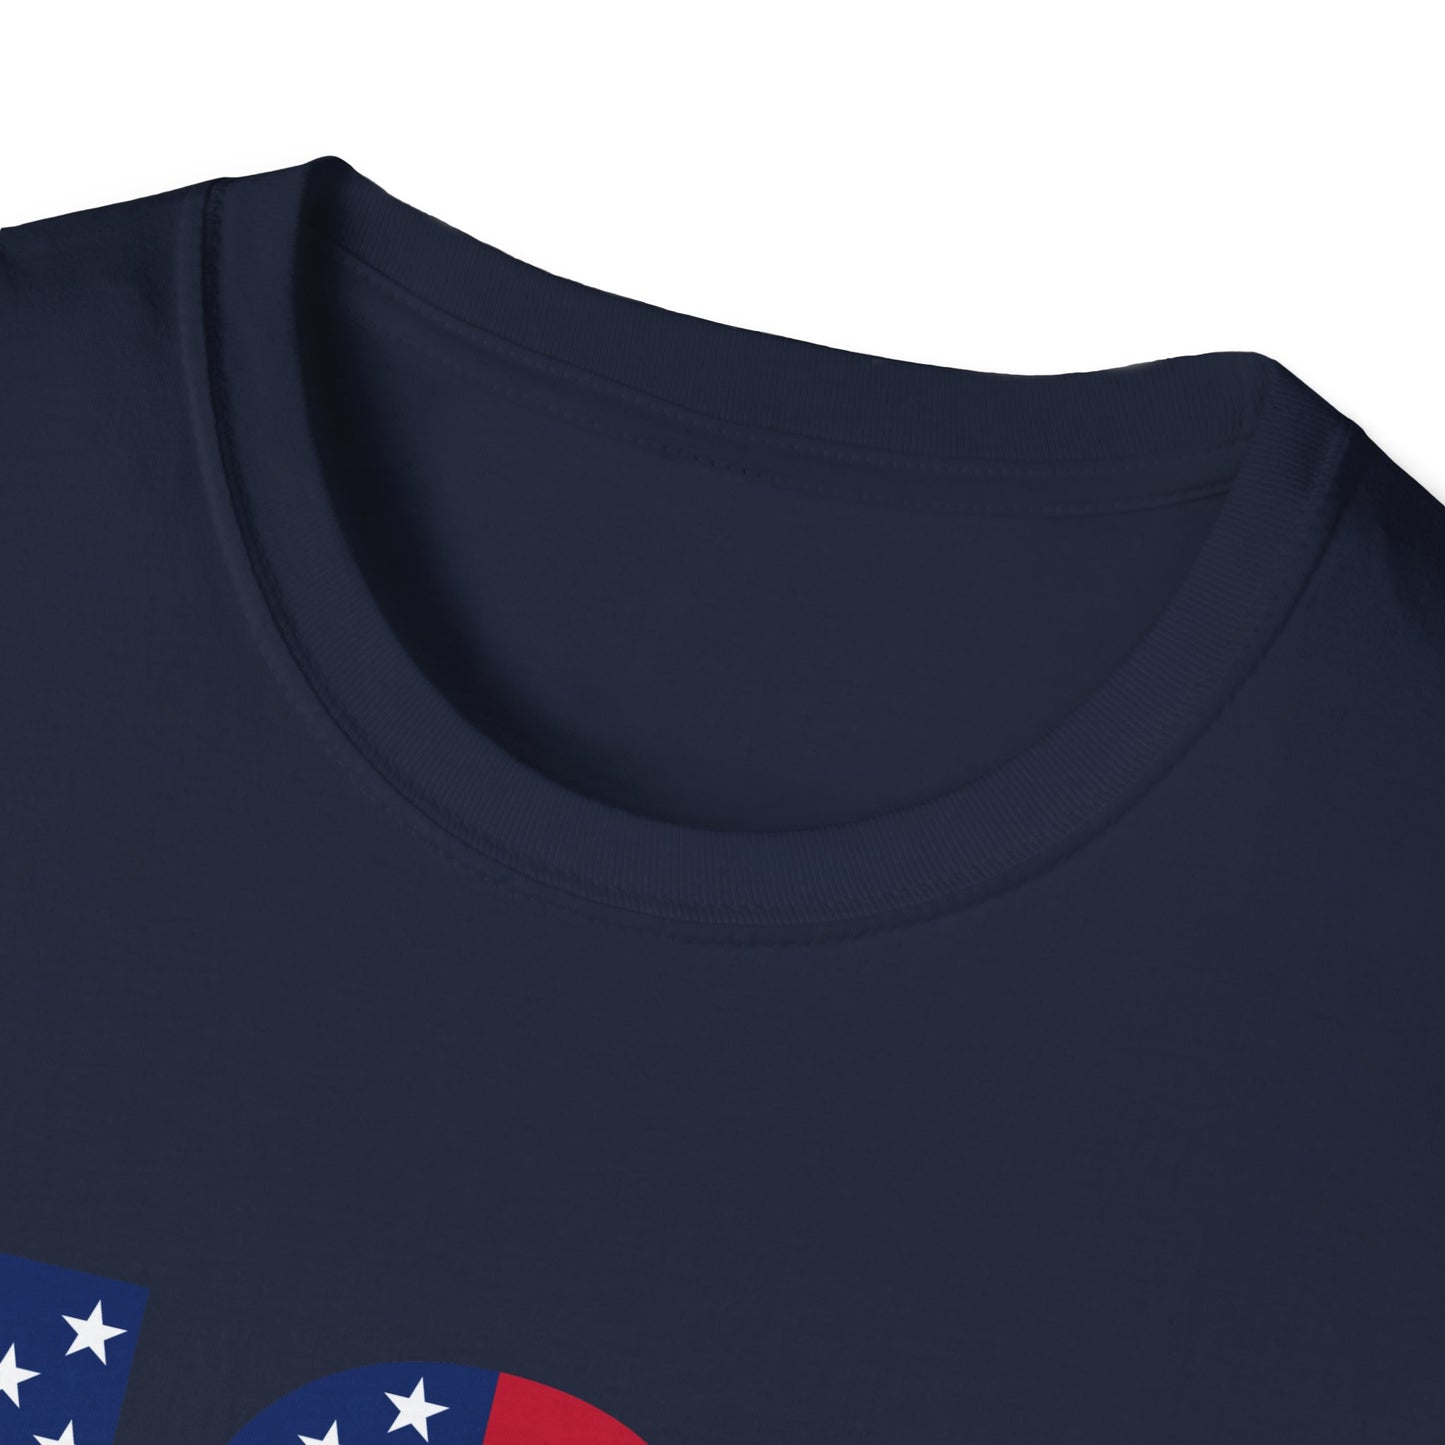 USA American Flag Colored - Unisex Softstyle T-Shirt